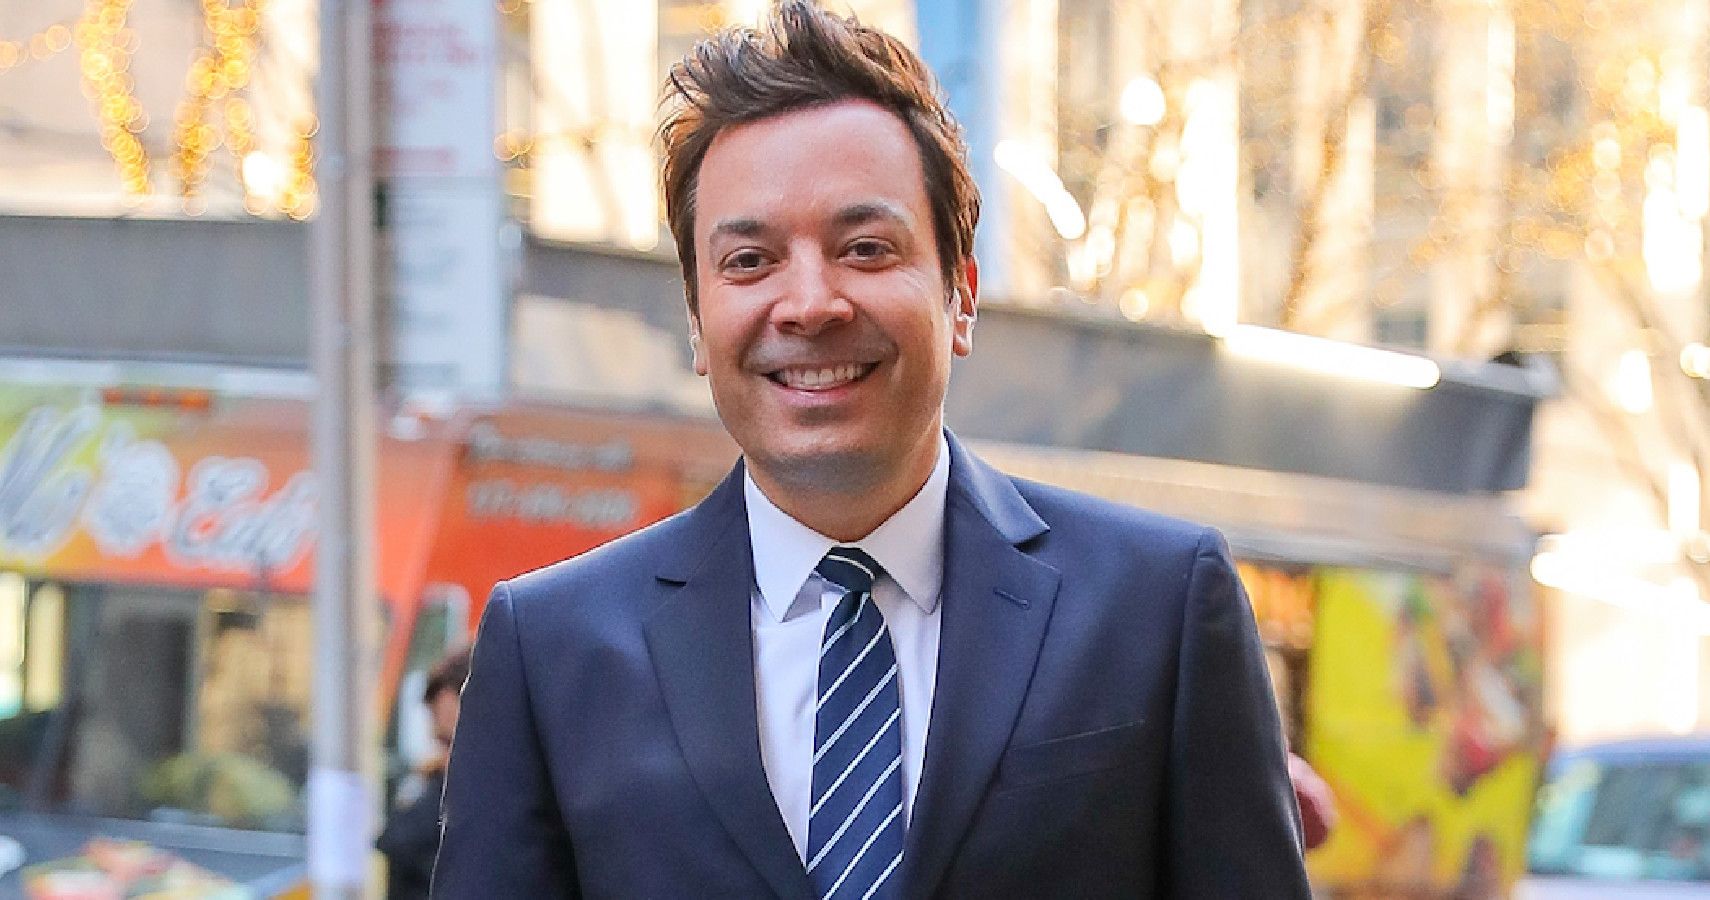 Jimmy Fallon smiling in New York 